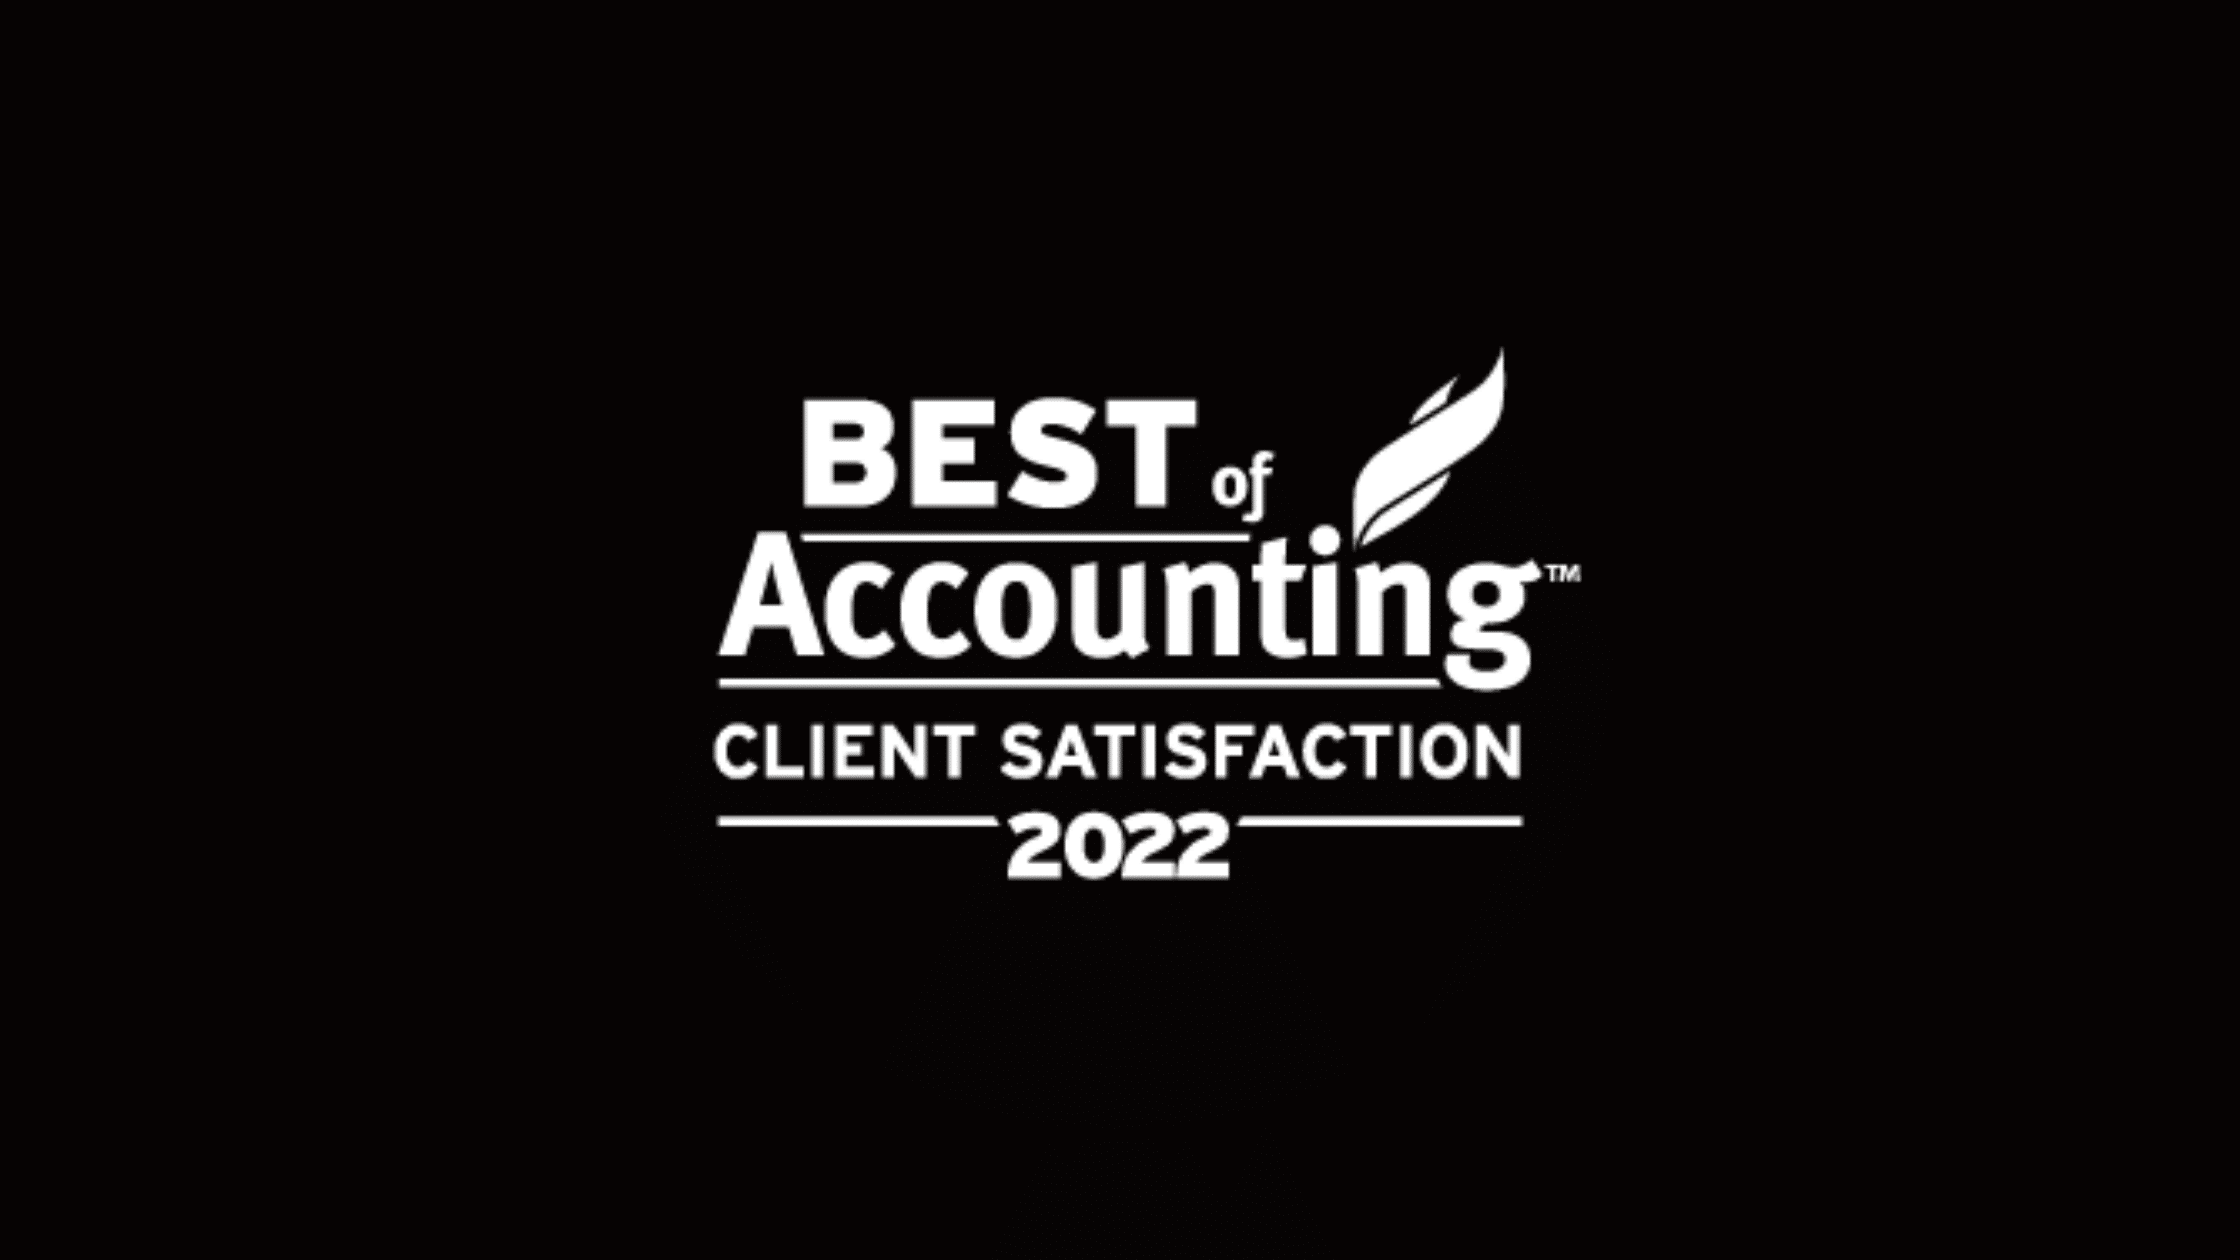 2022 best of accounting award